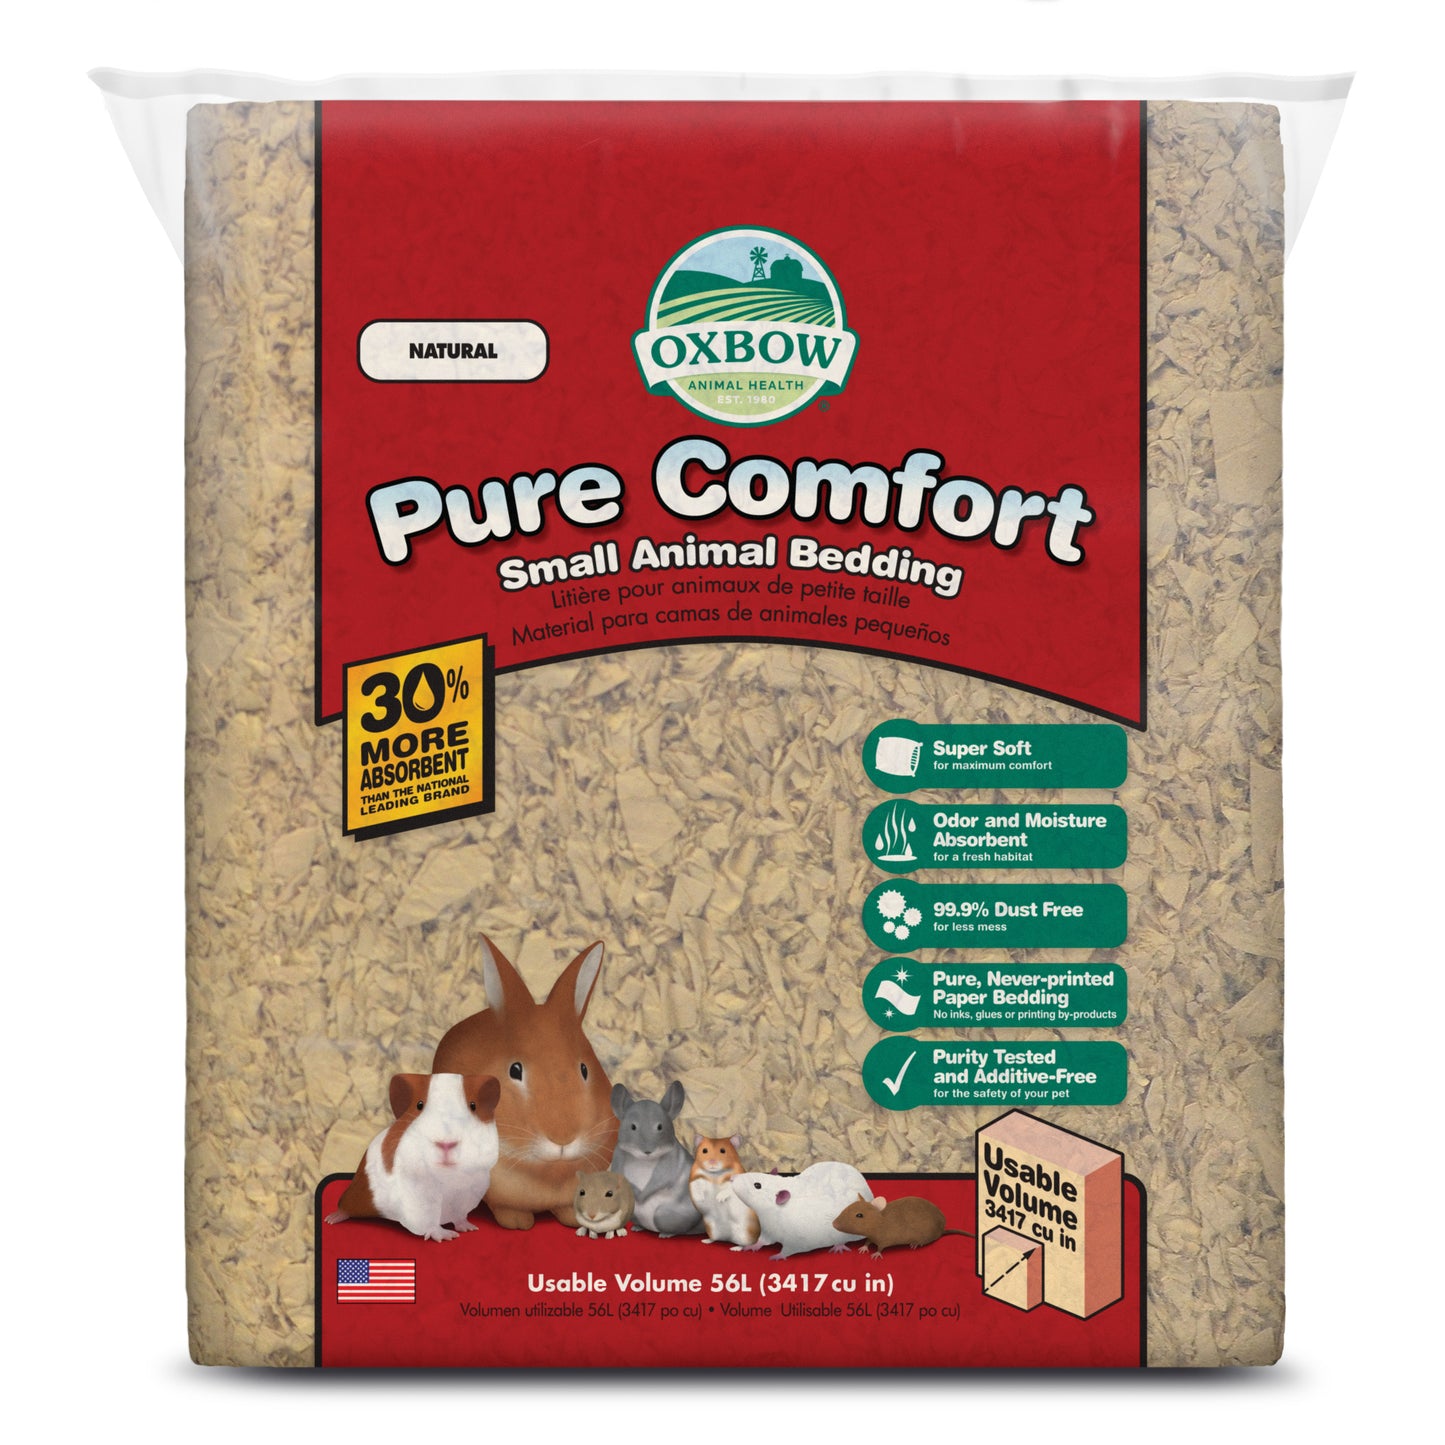 Pure Comfort Bedding - Oxbow Natural